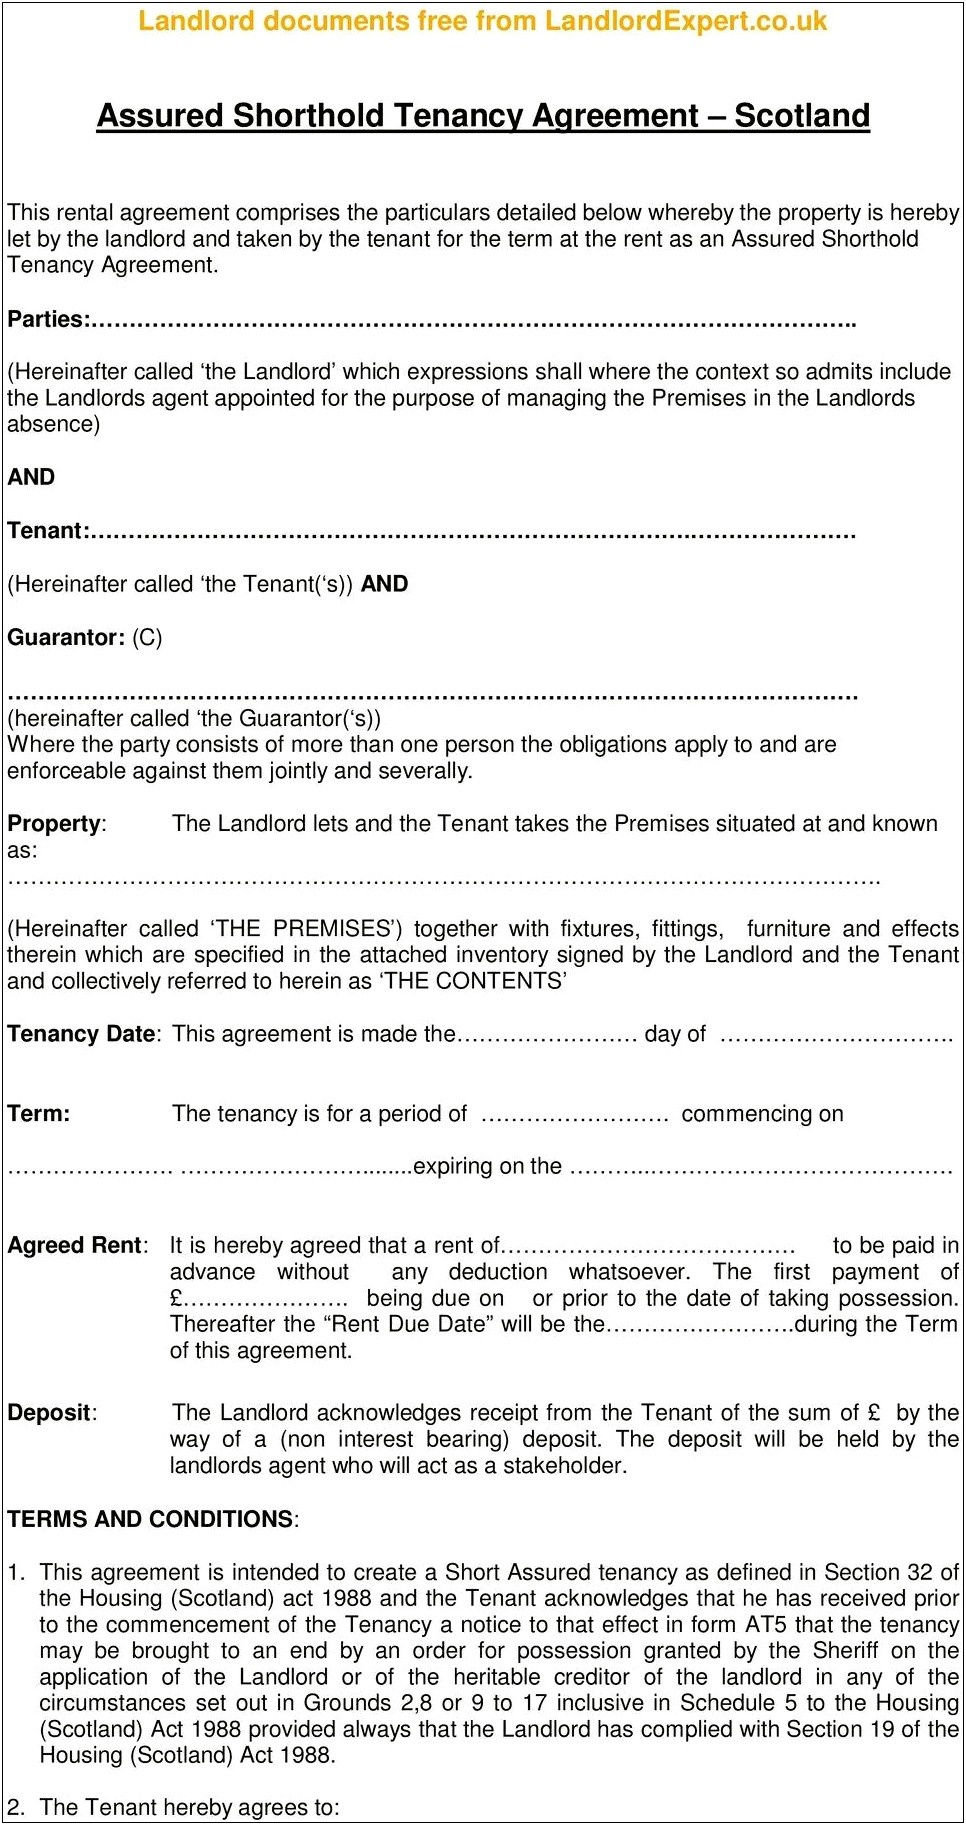 Assured Shorthold Tenancy Agreement Template Word Wales